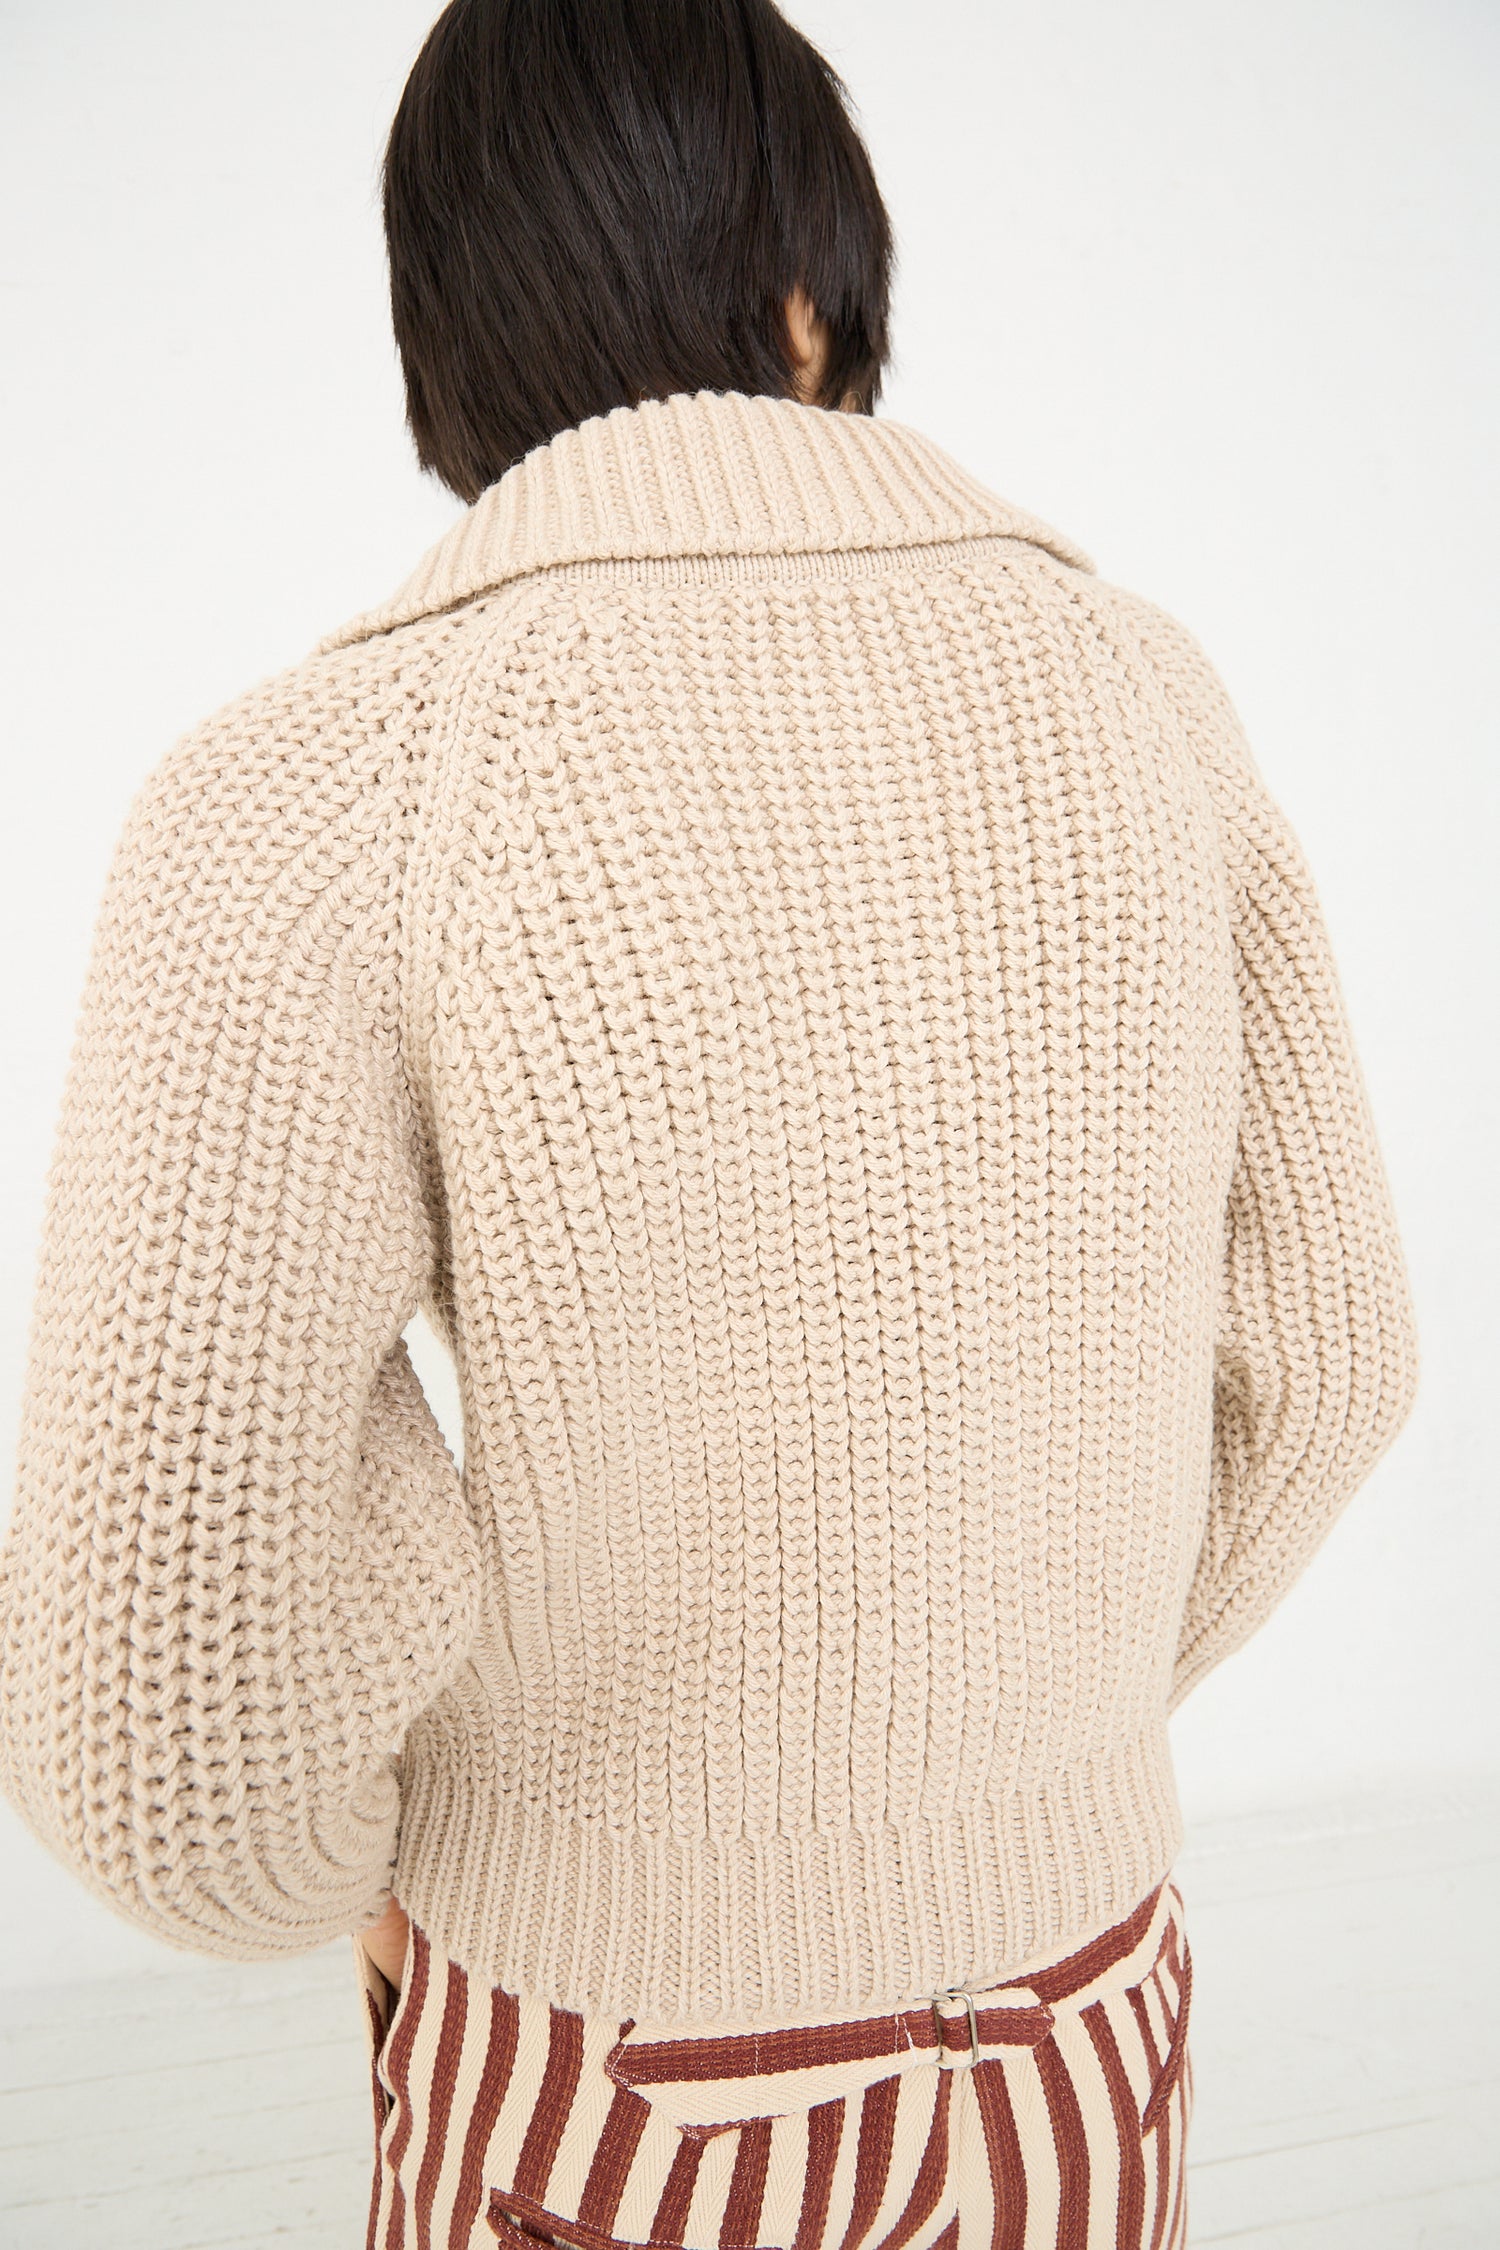 A person seen from behind wearing a Caron Callahan Cotton and Alpaca Freda Cardigan in Ecru and striped pants.